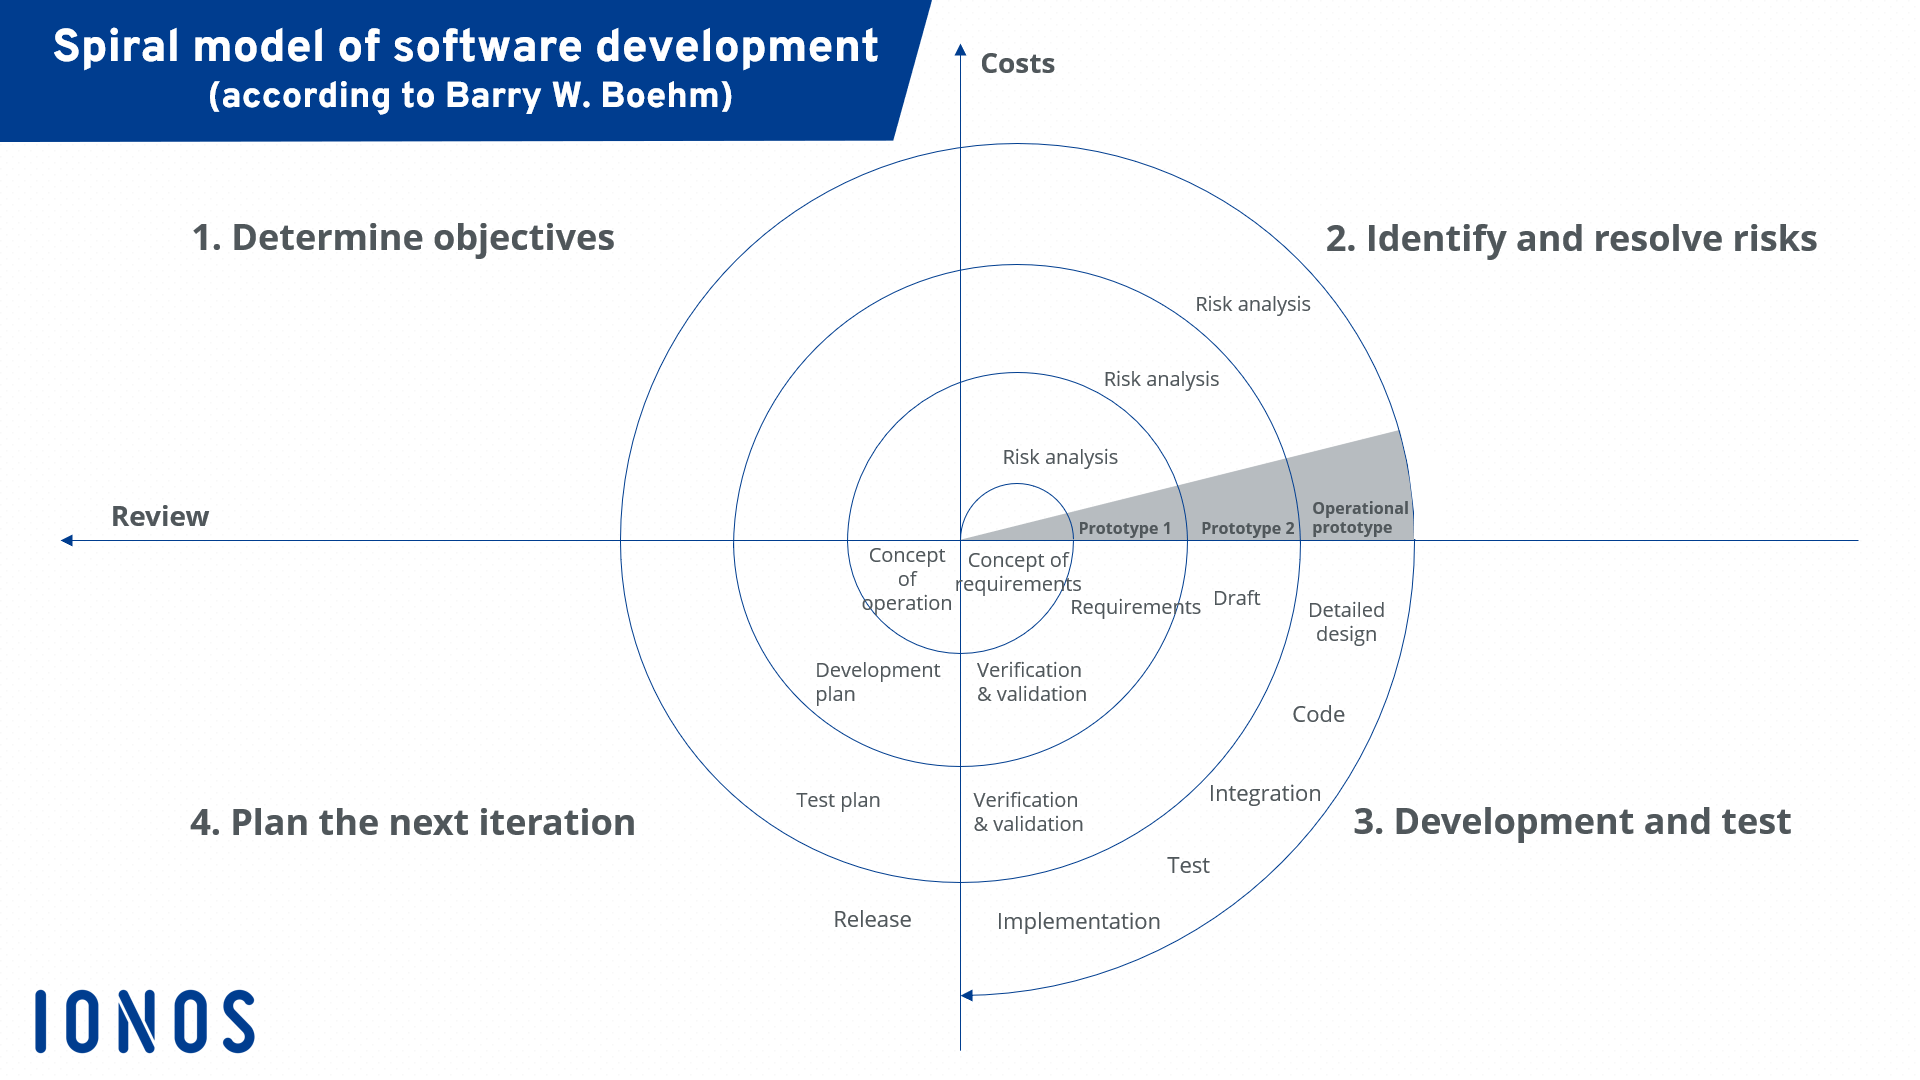 Graphical representation of the spiral model (software development)